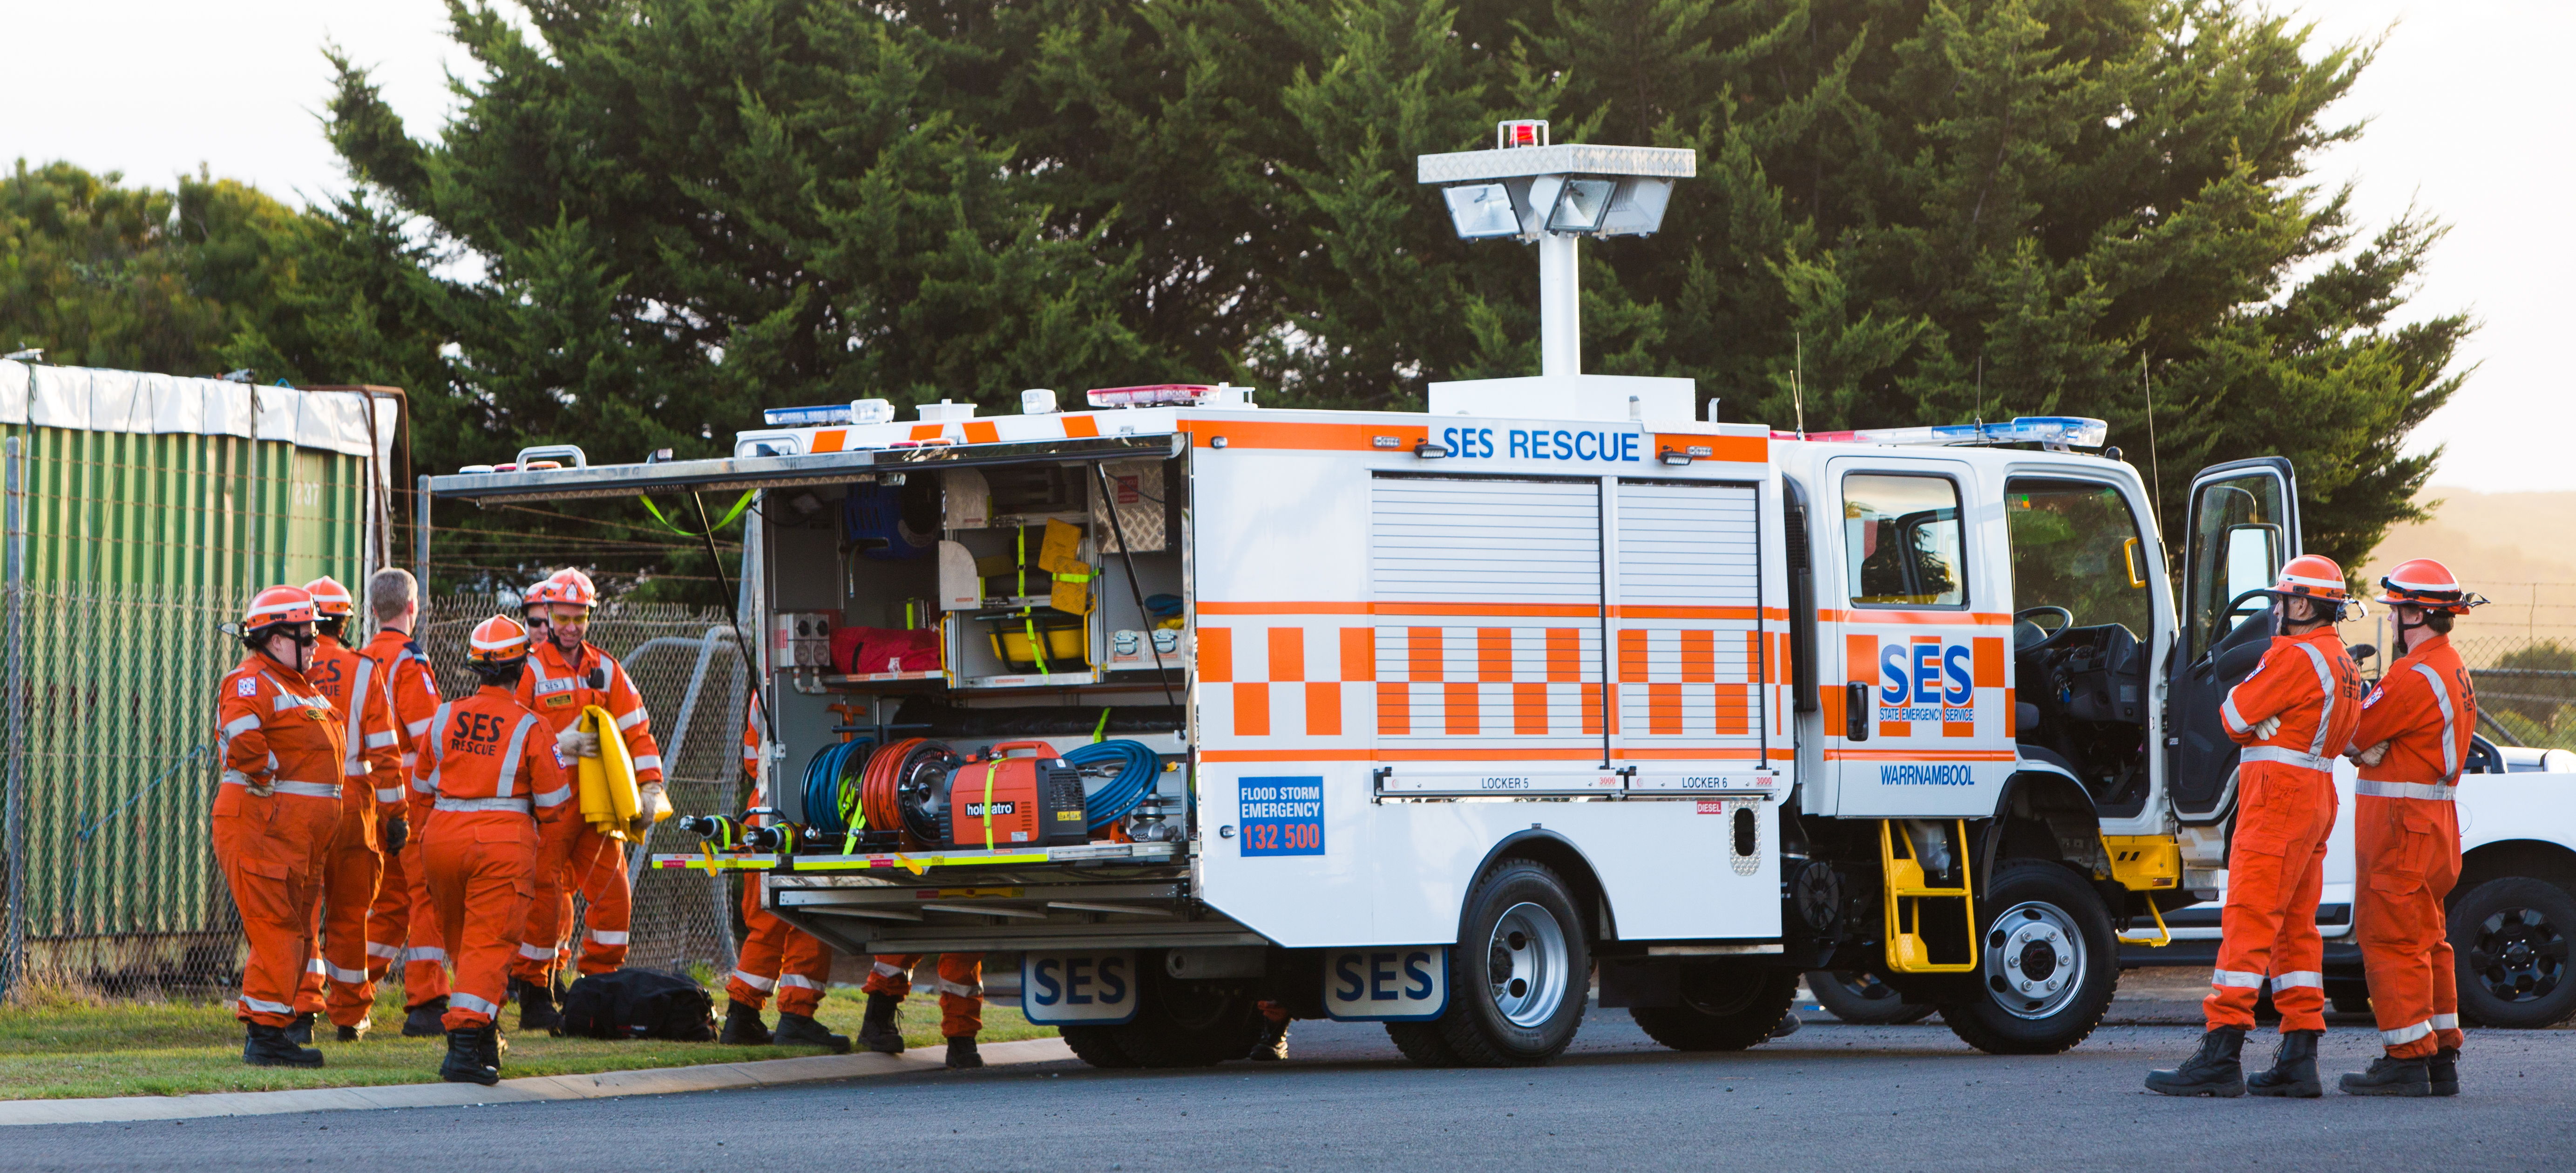 An Isuzu NPS 75/45-155 4x4 Crew put to work by the SES